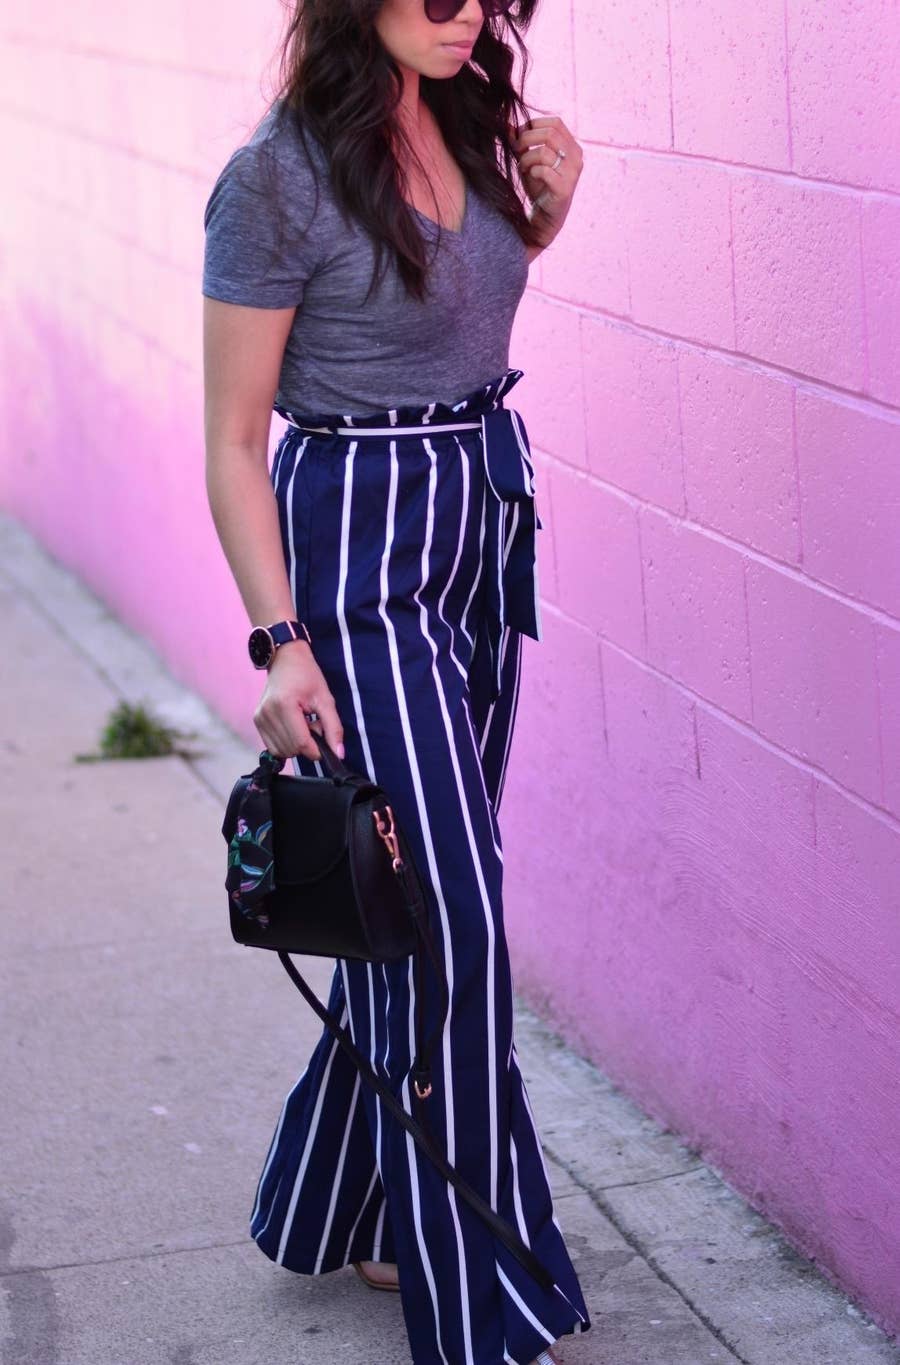 shoppers love these flattering work pants that are on sale